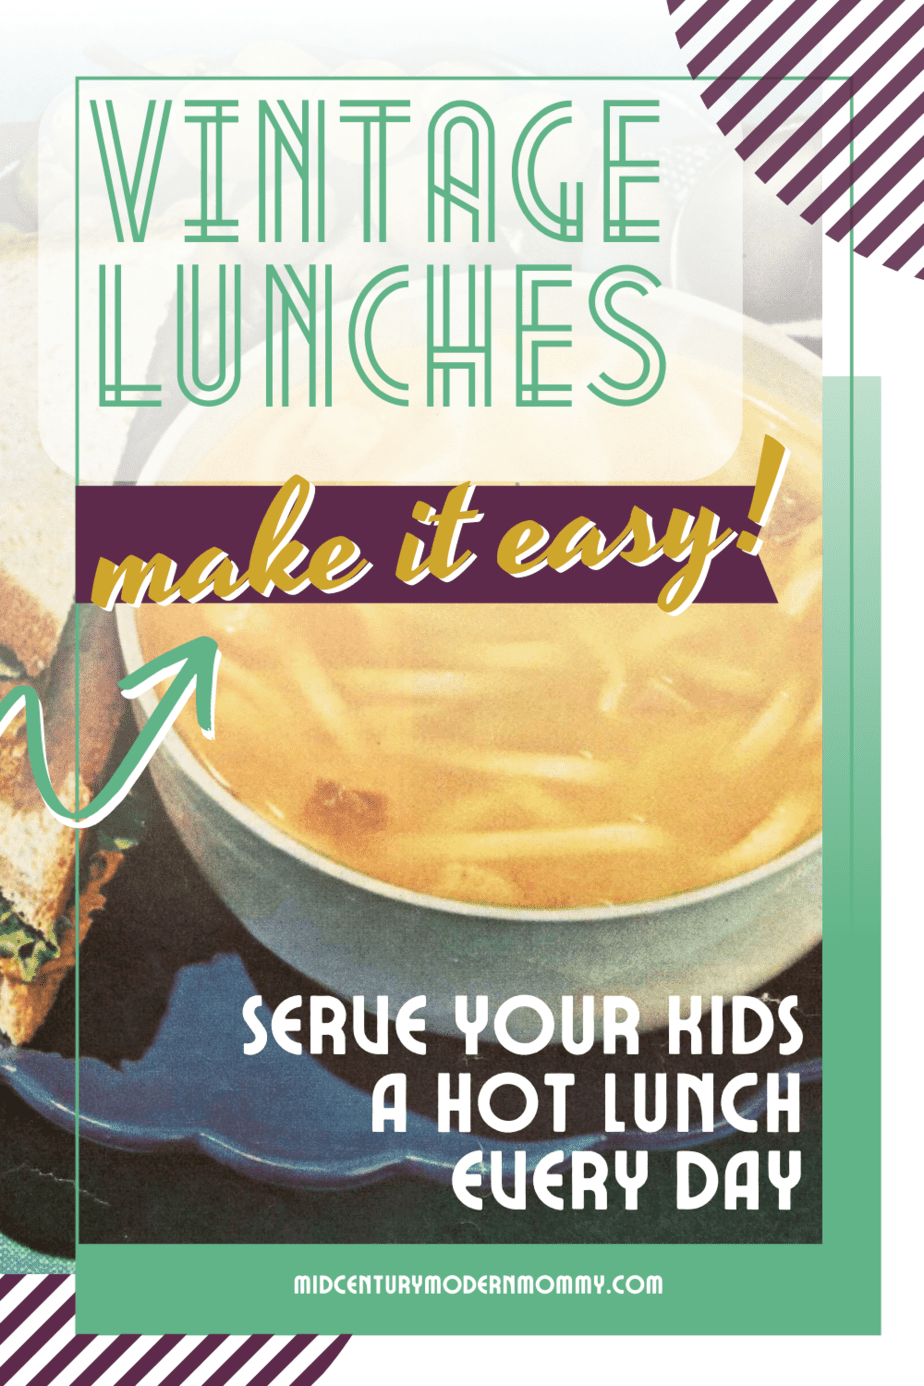 https://midcenturymodernmommy.com/wp-content/uploads/2022/01/How-to-Serve-Your-Kids-a-Hot-Lunch-Every-Day.png